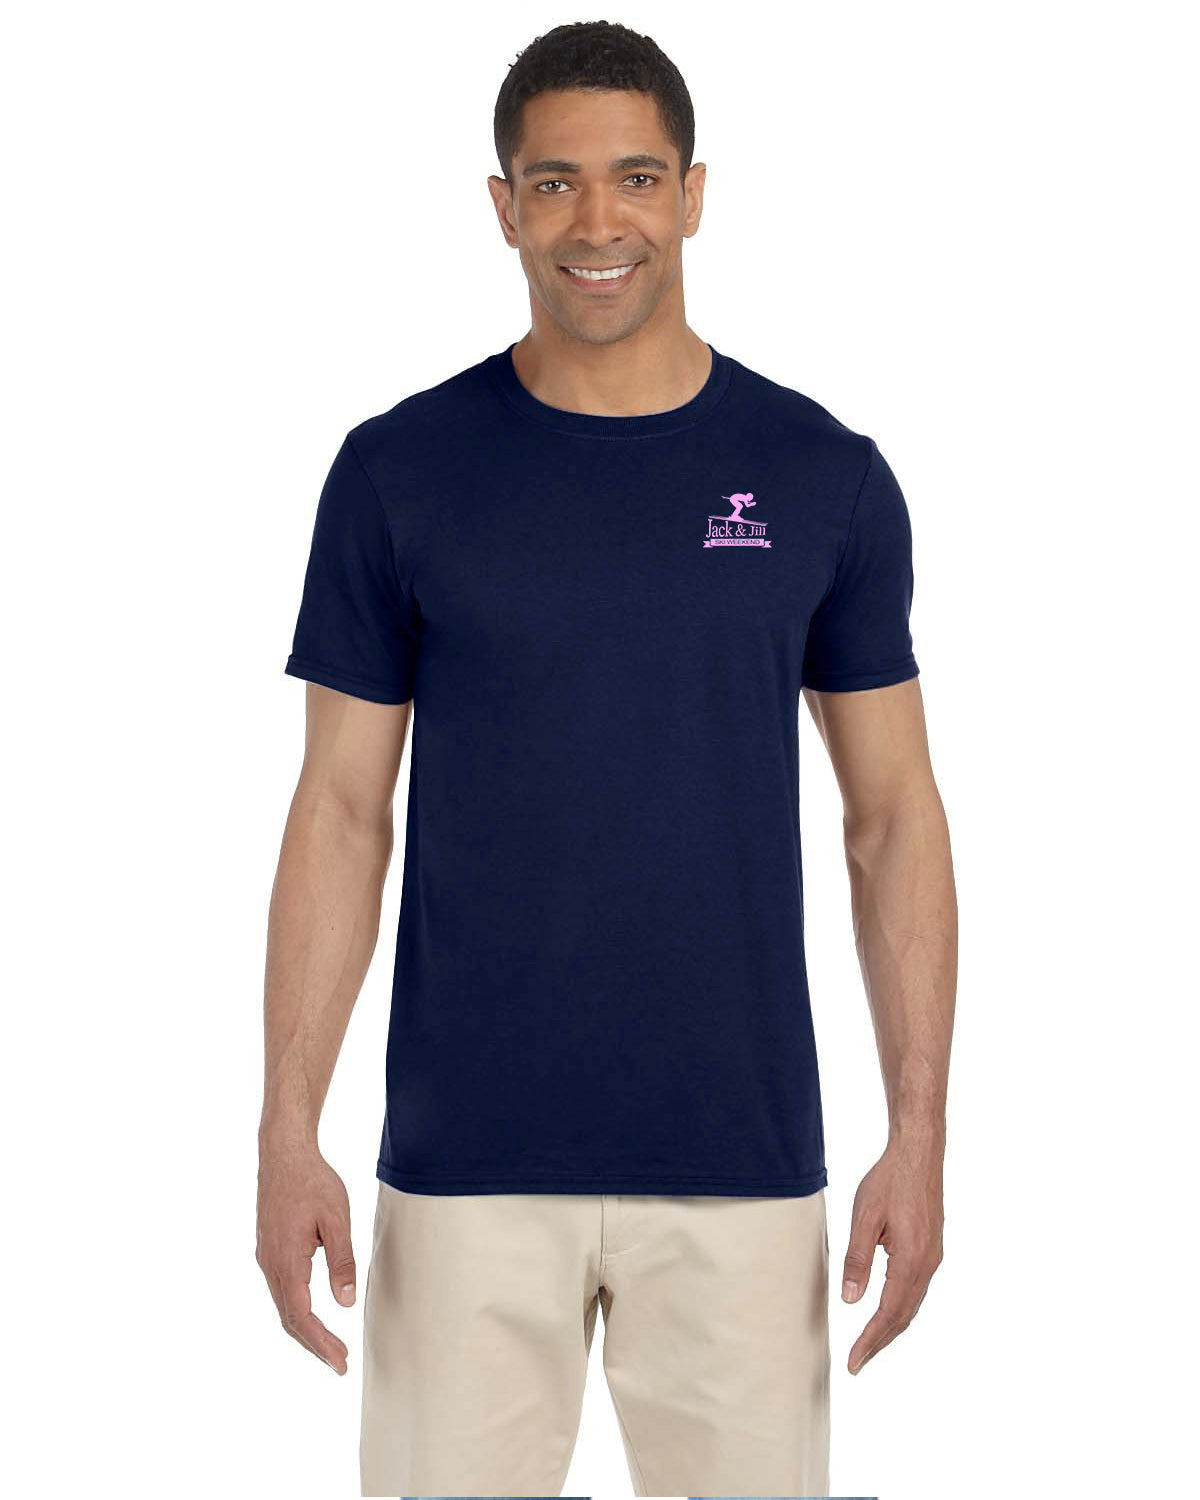 Blue Adult Softstyle T-Shirt